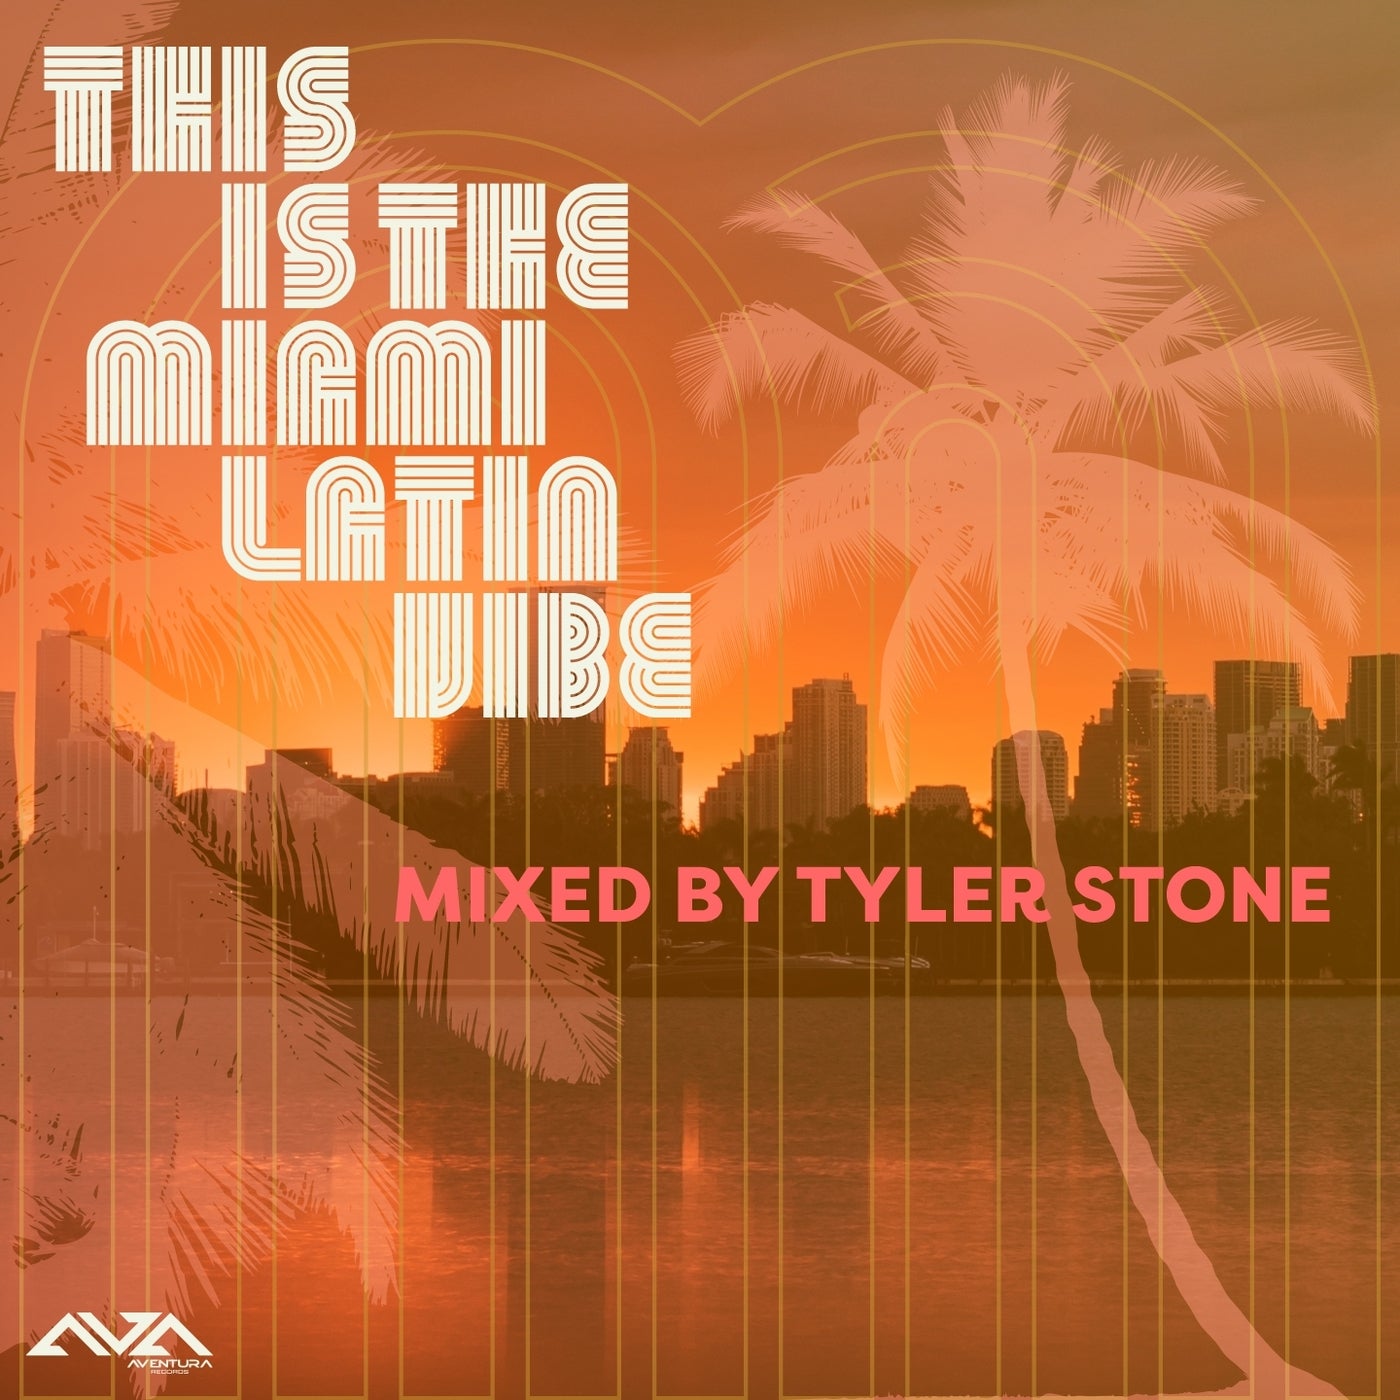 This Is The Miami Latin Vibe (Unmixed) By Tyler Stone